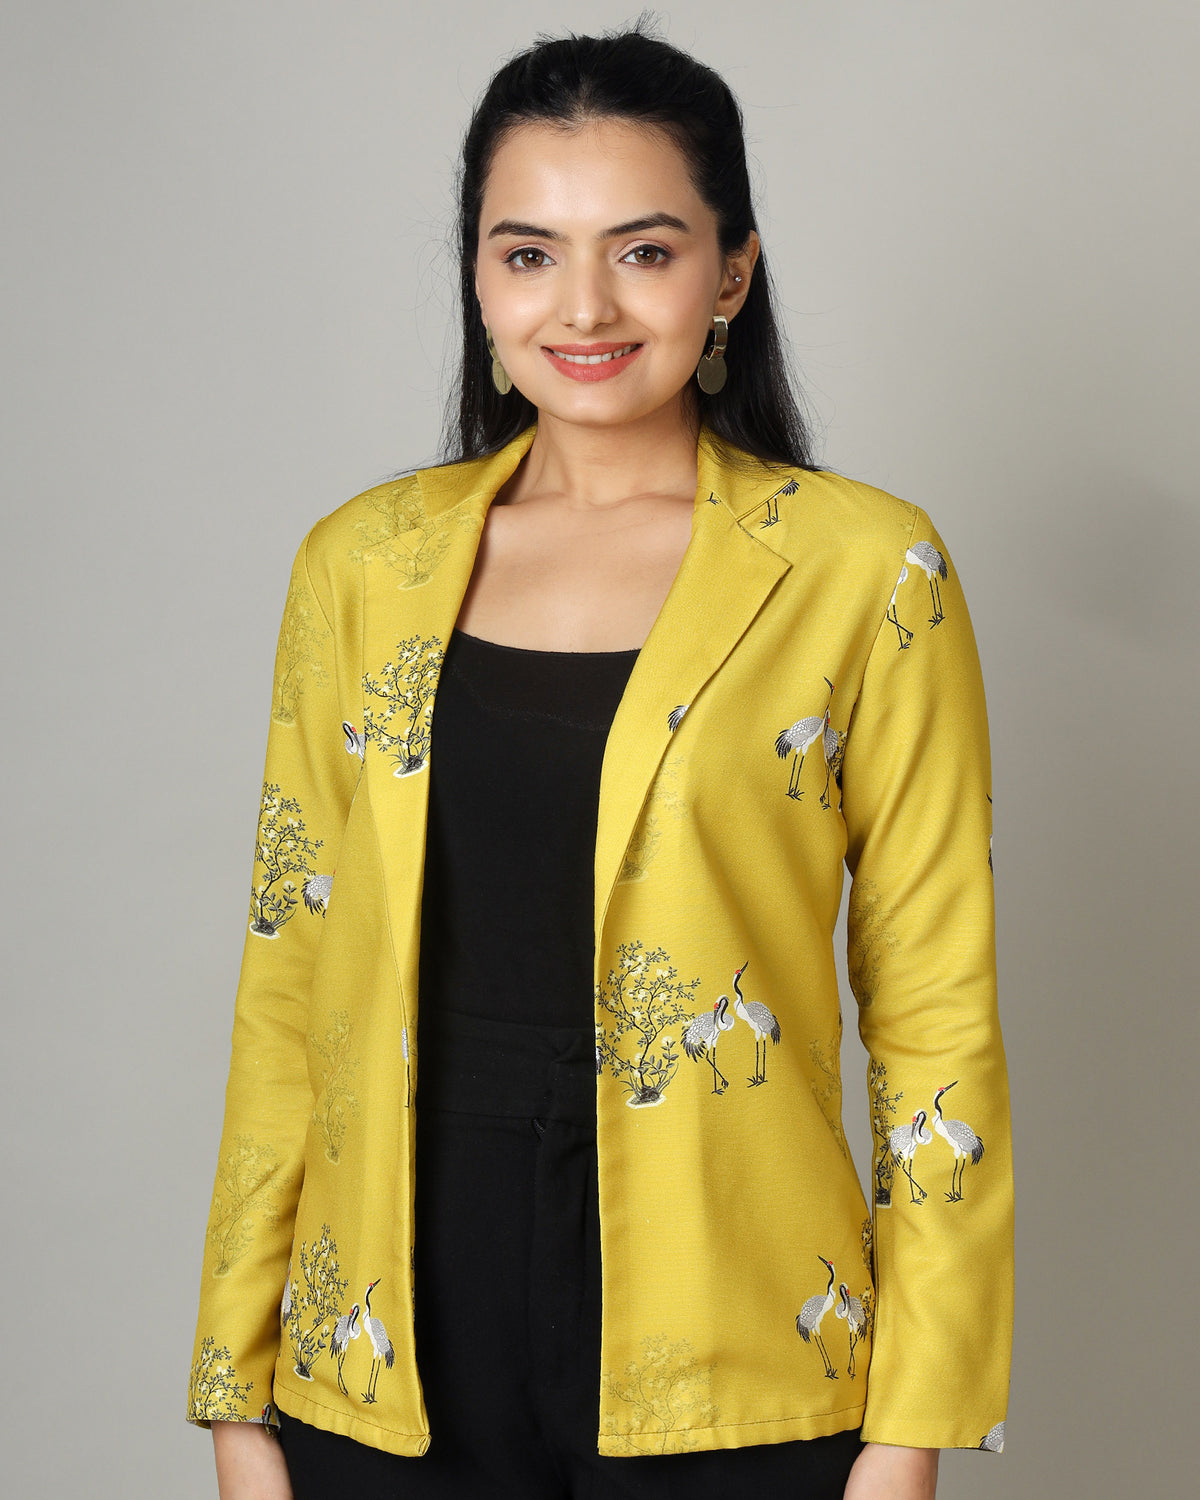 Stuning Quirky Jacket For Women